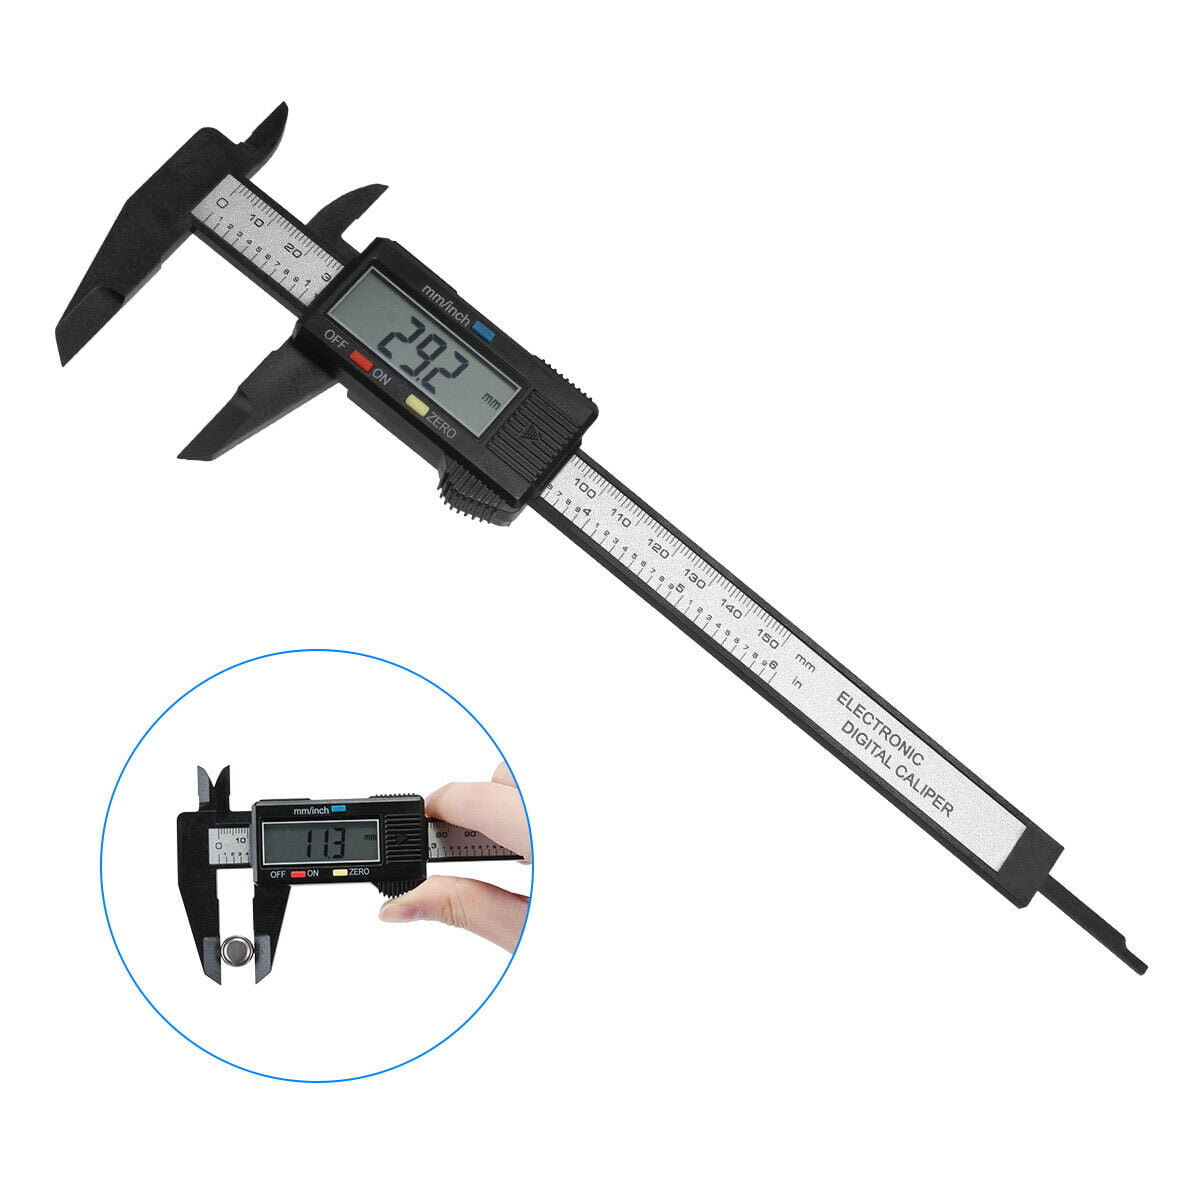 Electronic Digital Caliper Vernier Large LCD Screen 0-6 Inches Low Cost Inch Millimeter Conversion Measuring Tool 